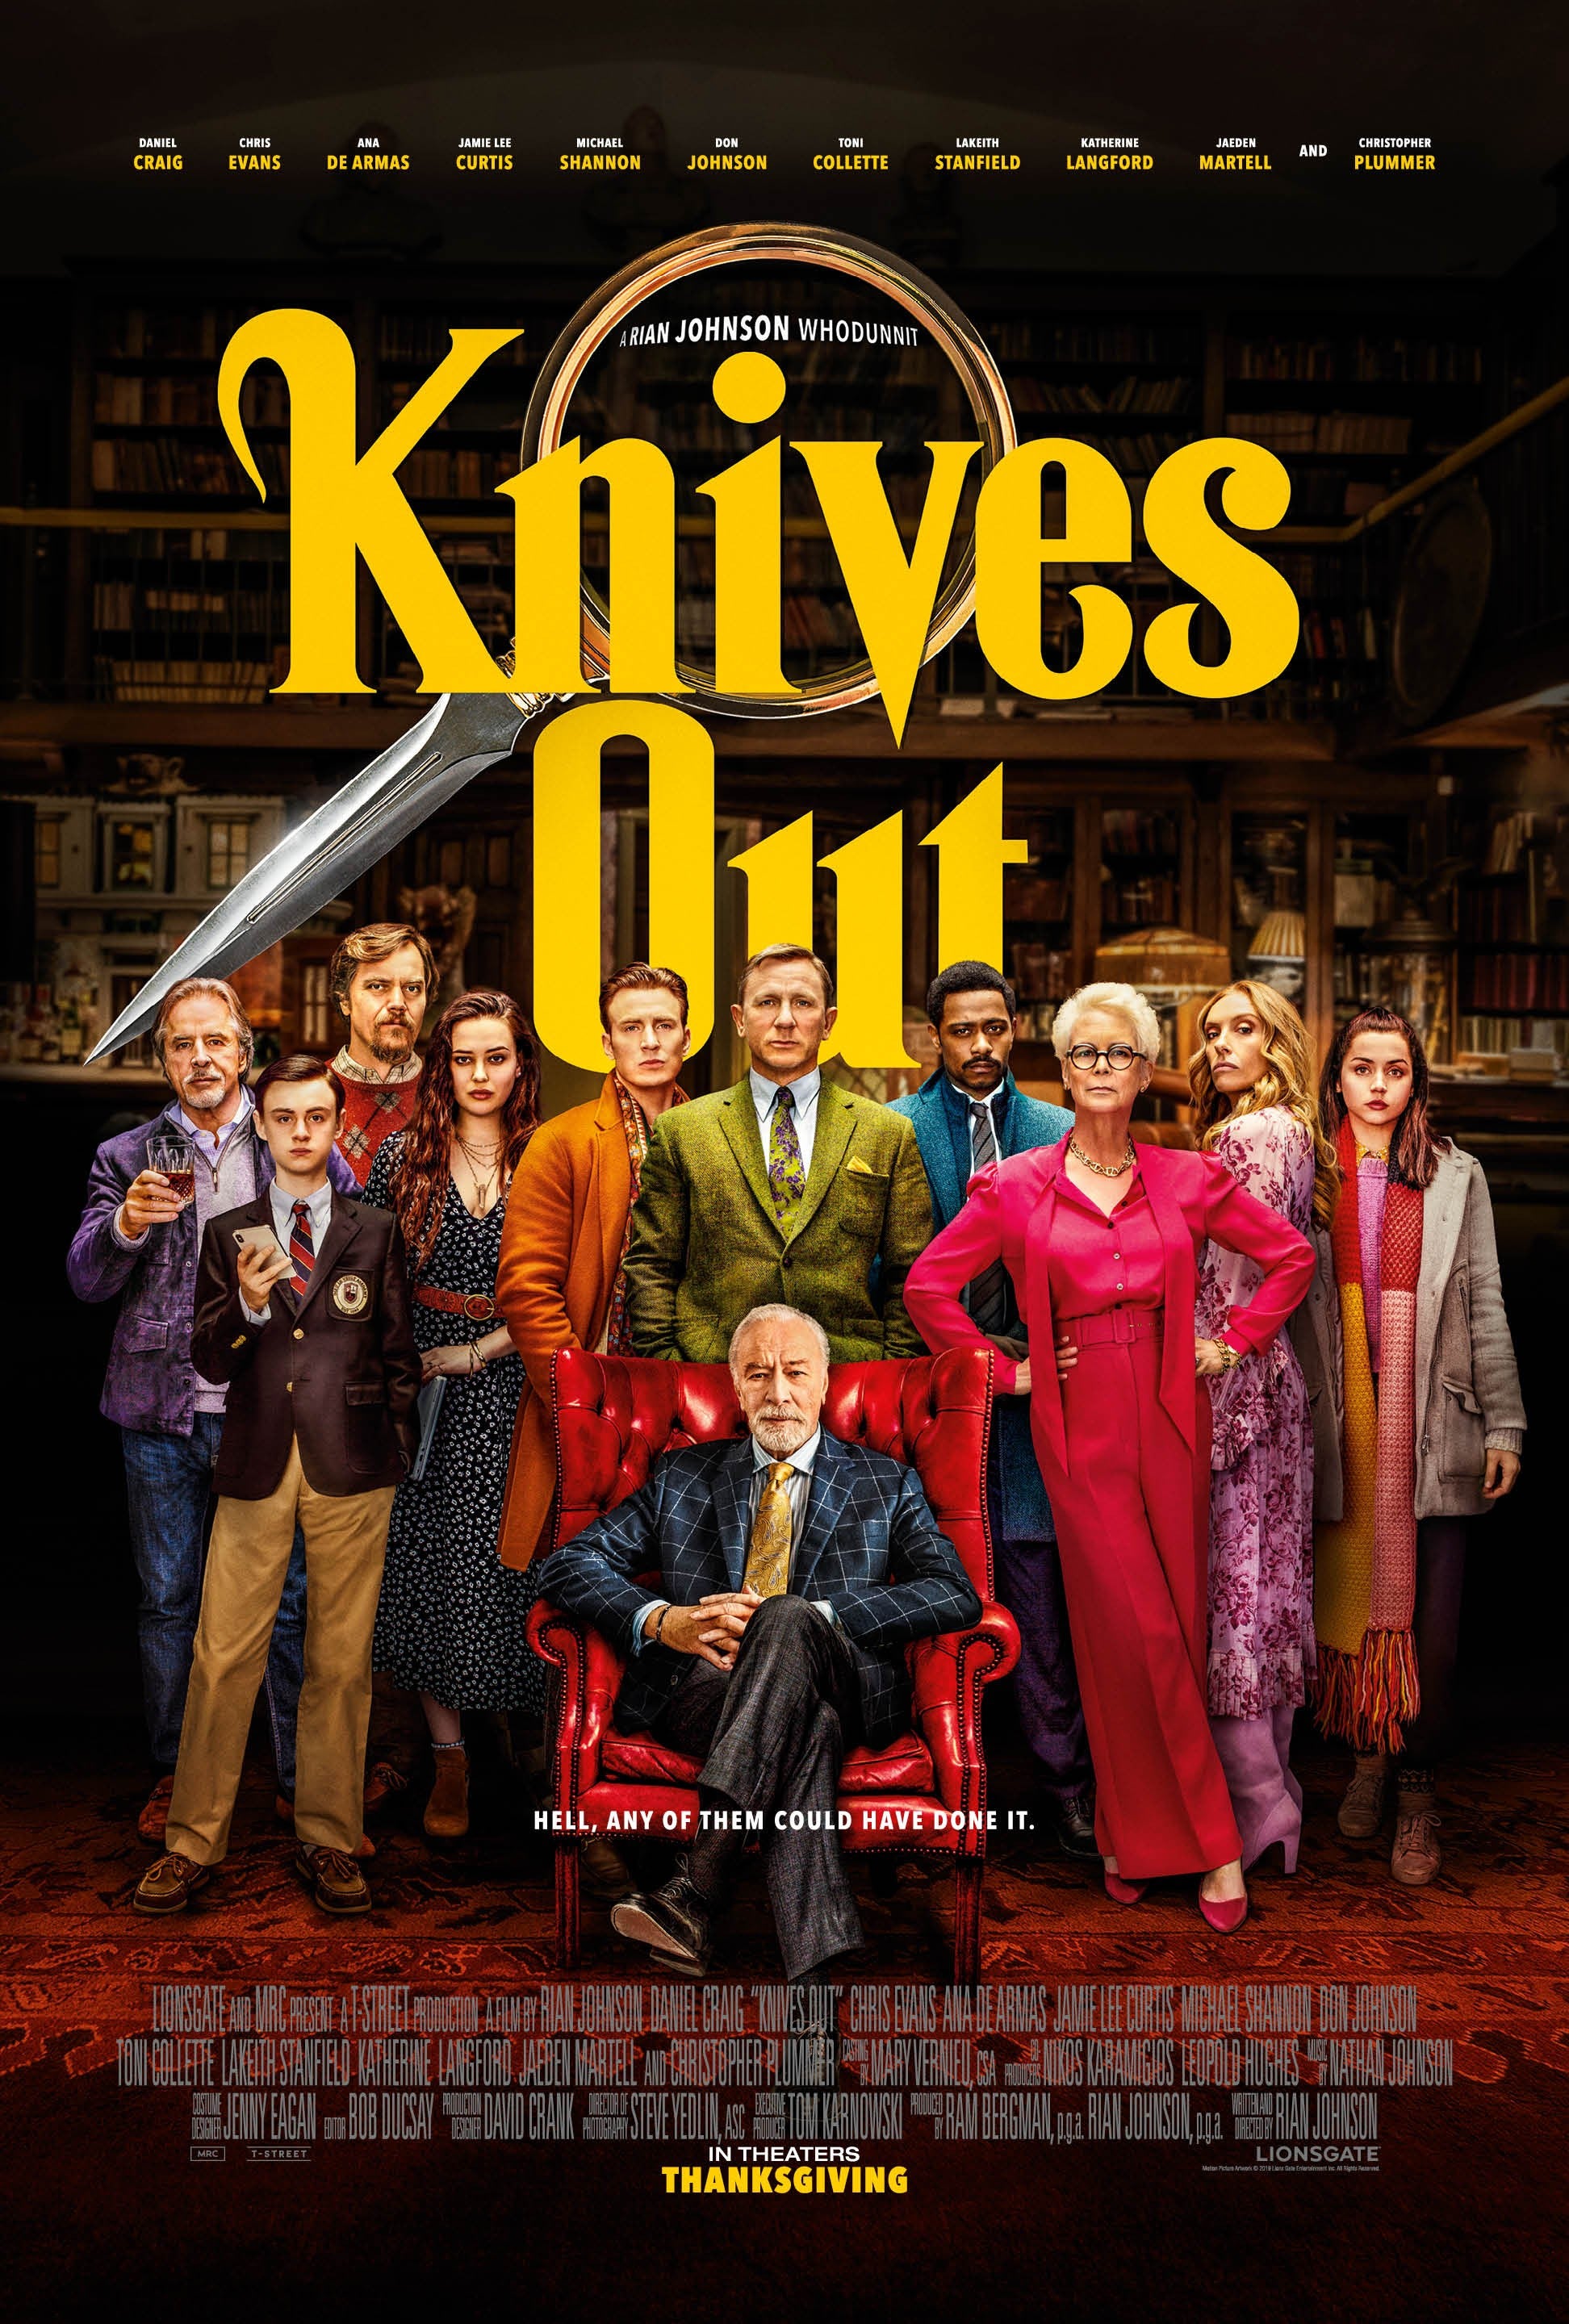 Image of the movie poster for Knives Out